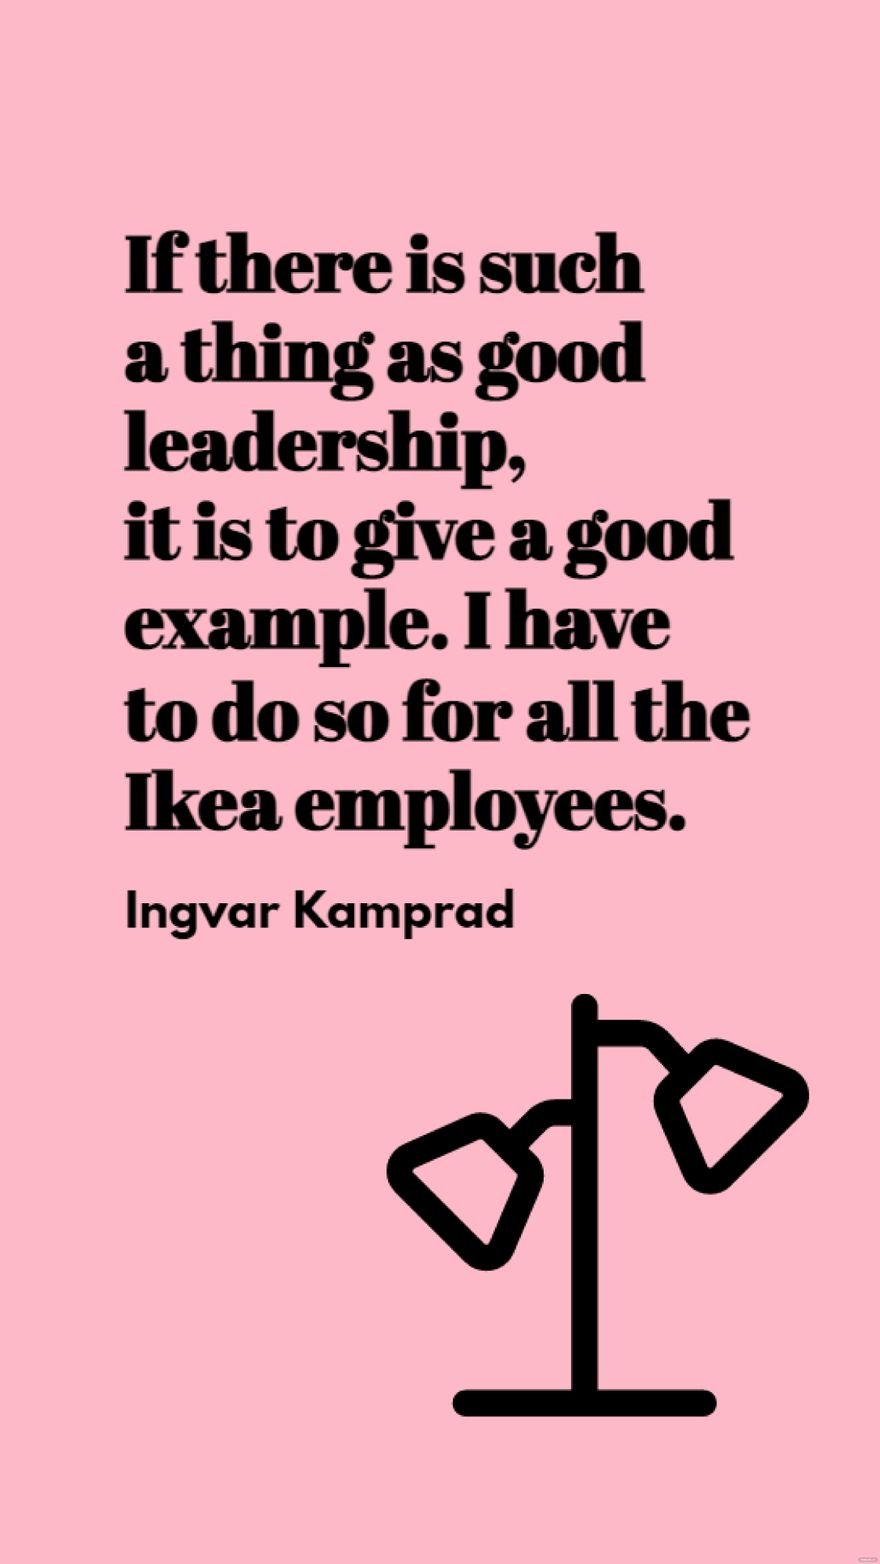 Free Ingvar Kamprad - If there is such a thing as good leadership, it is to give a good example. I have to do so for all the Ikea employees.